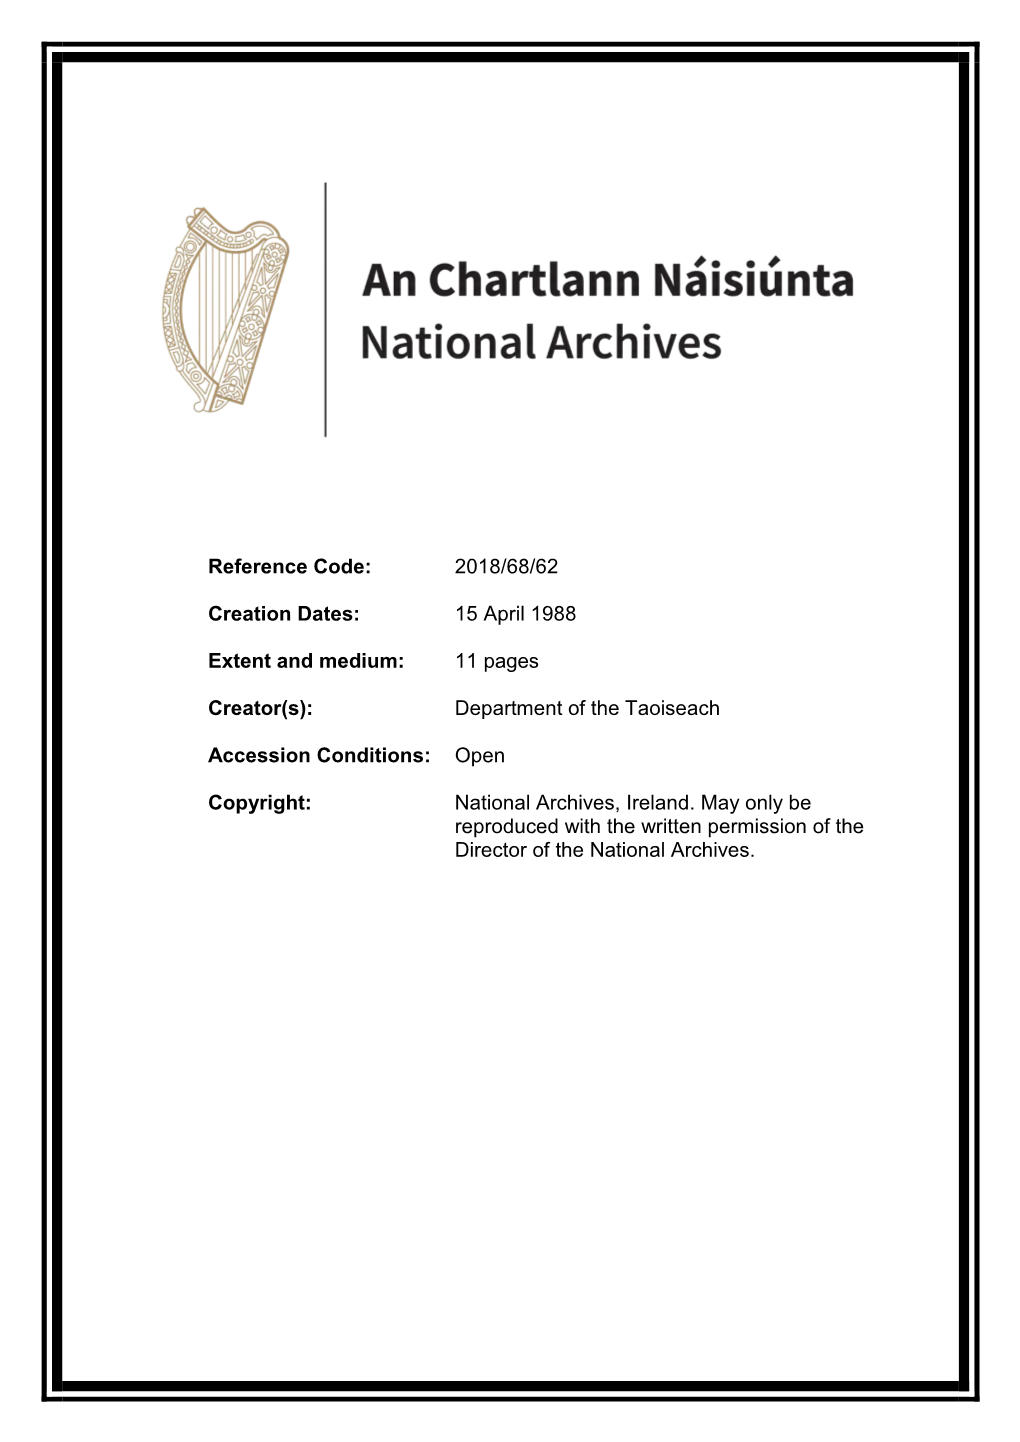 2018/68/62 15 April 1988 11 Pages Department of the Taoiseach